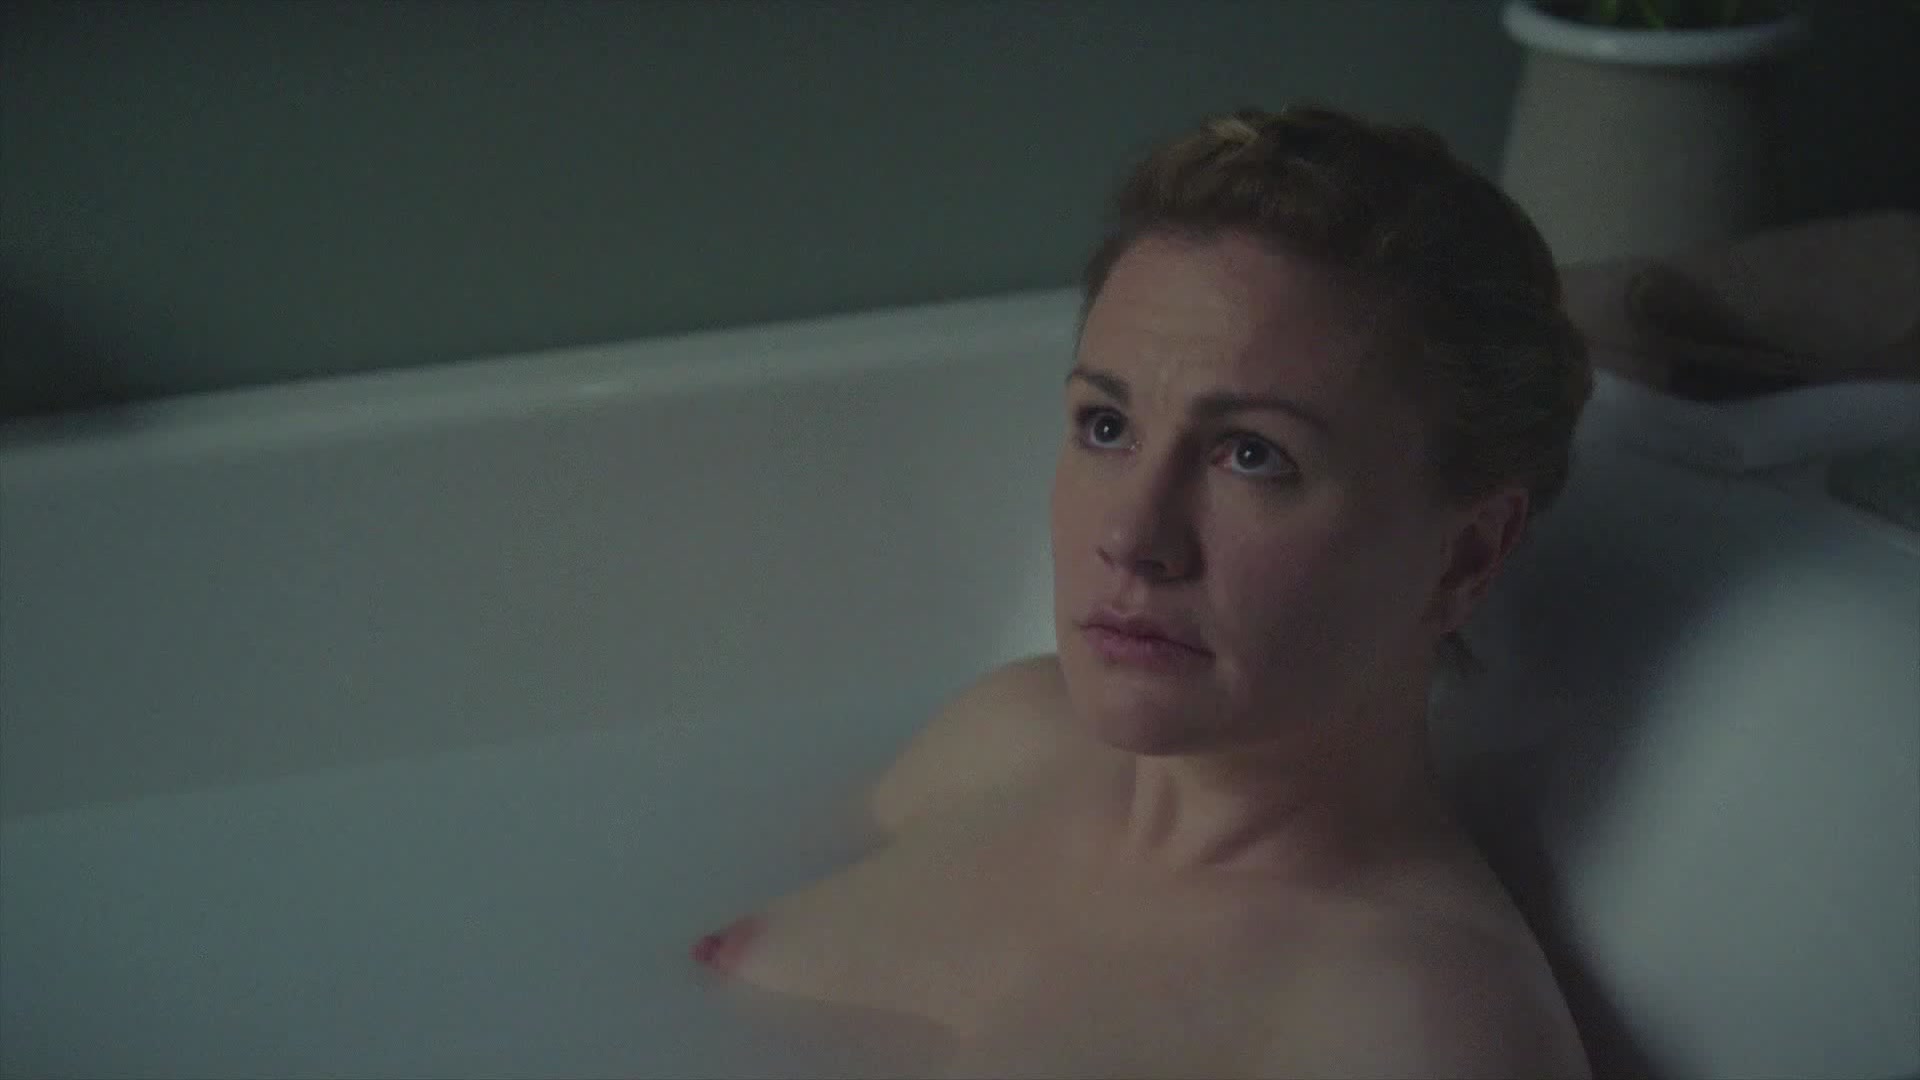 All the Hottest Anna Paquin Screencaps from “The Affair” [18 Images]